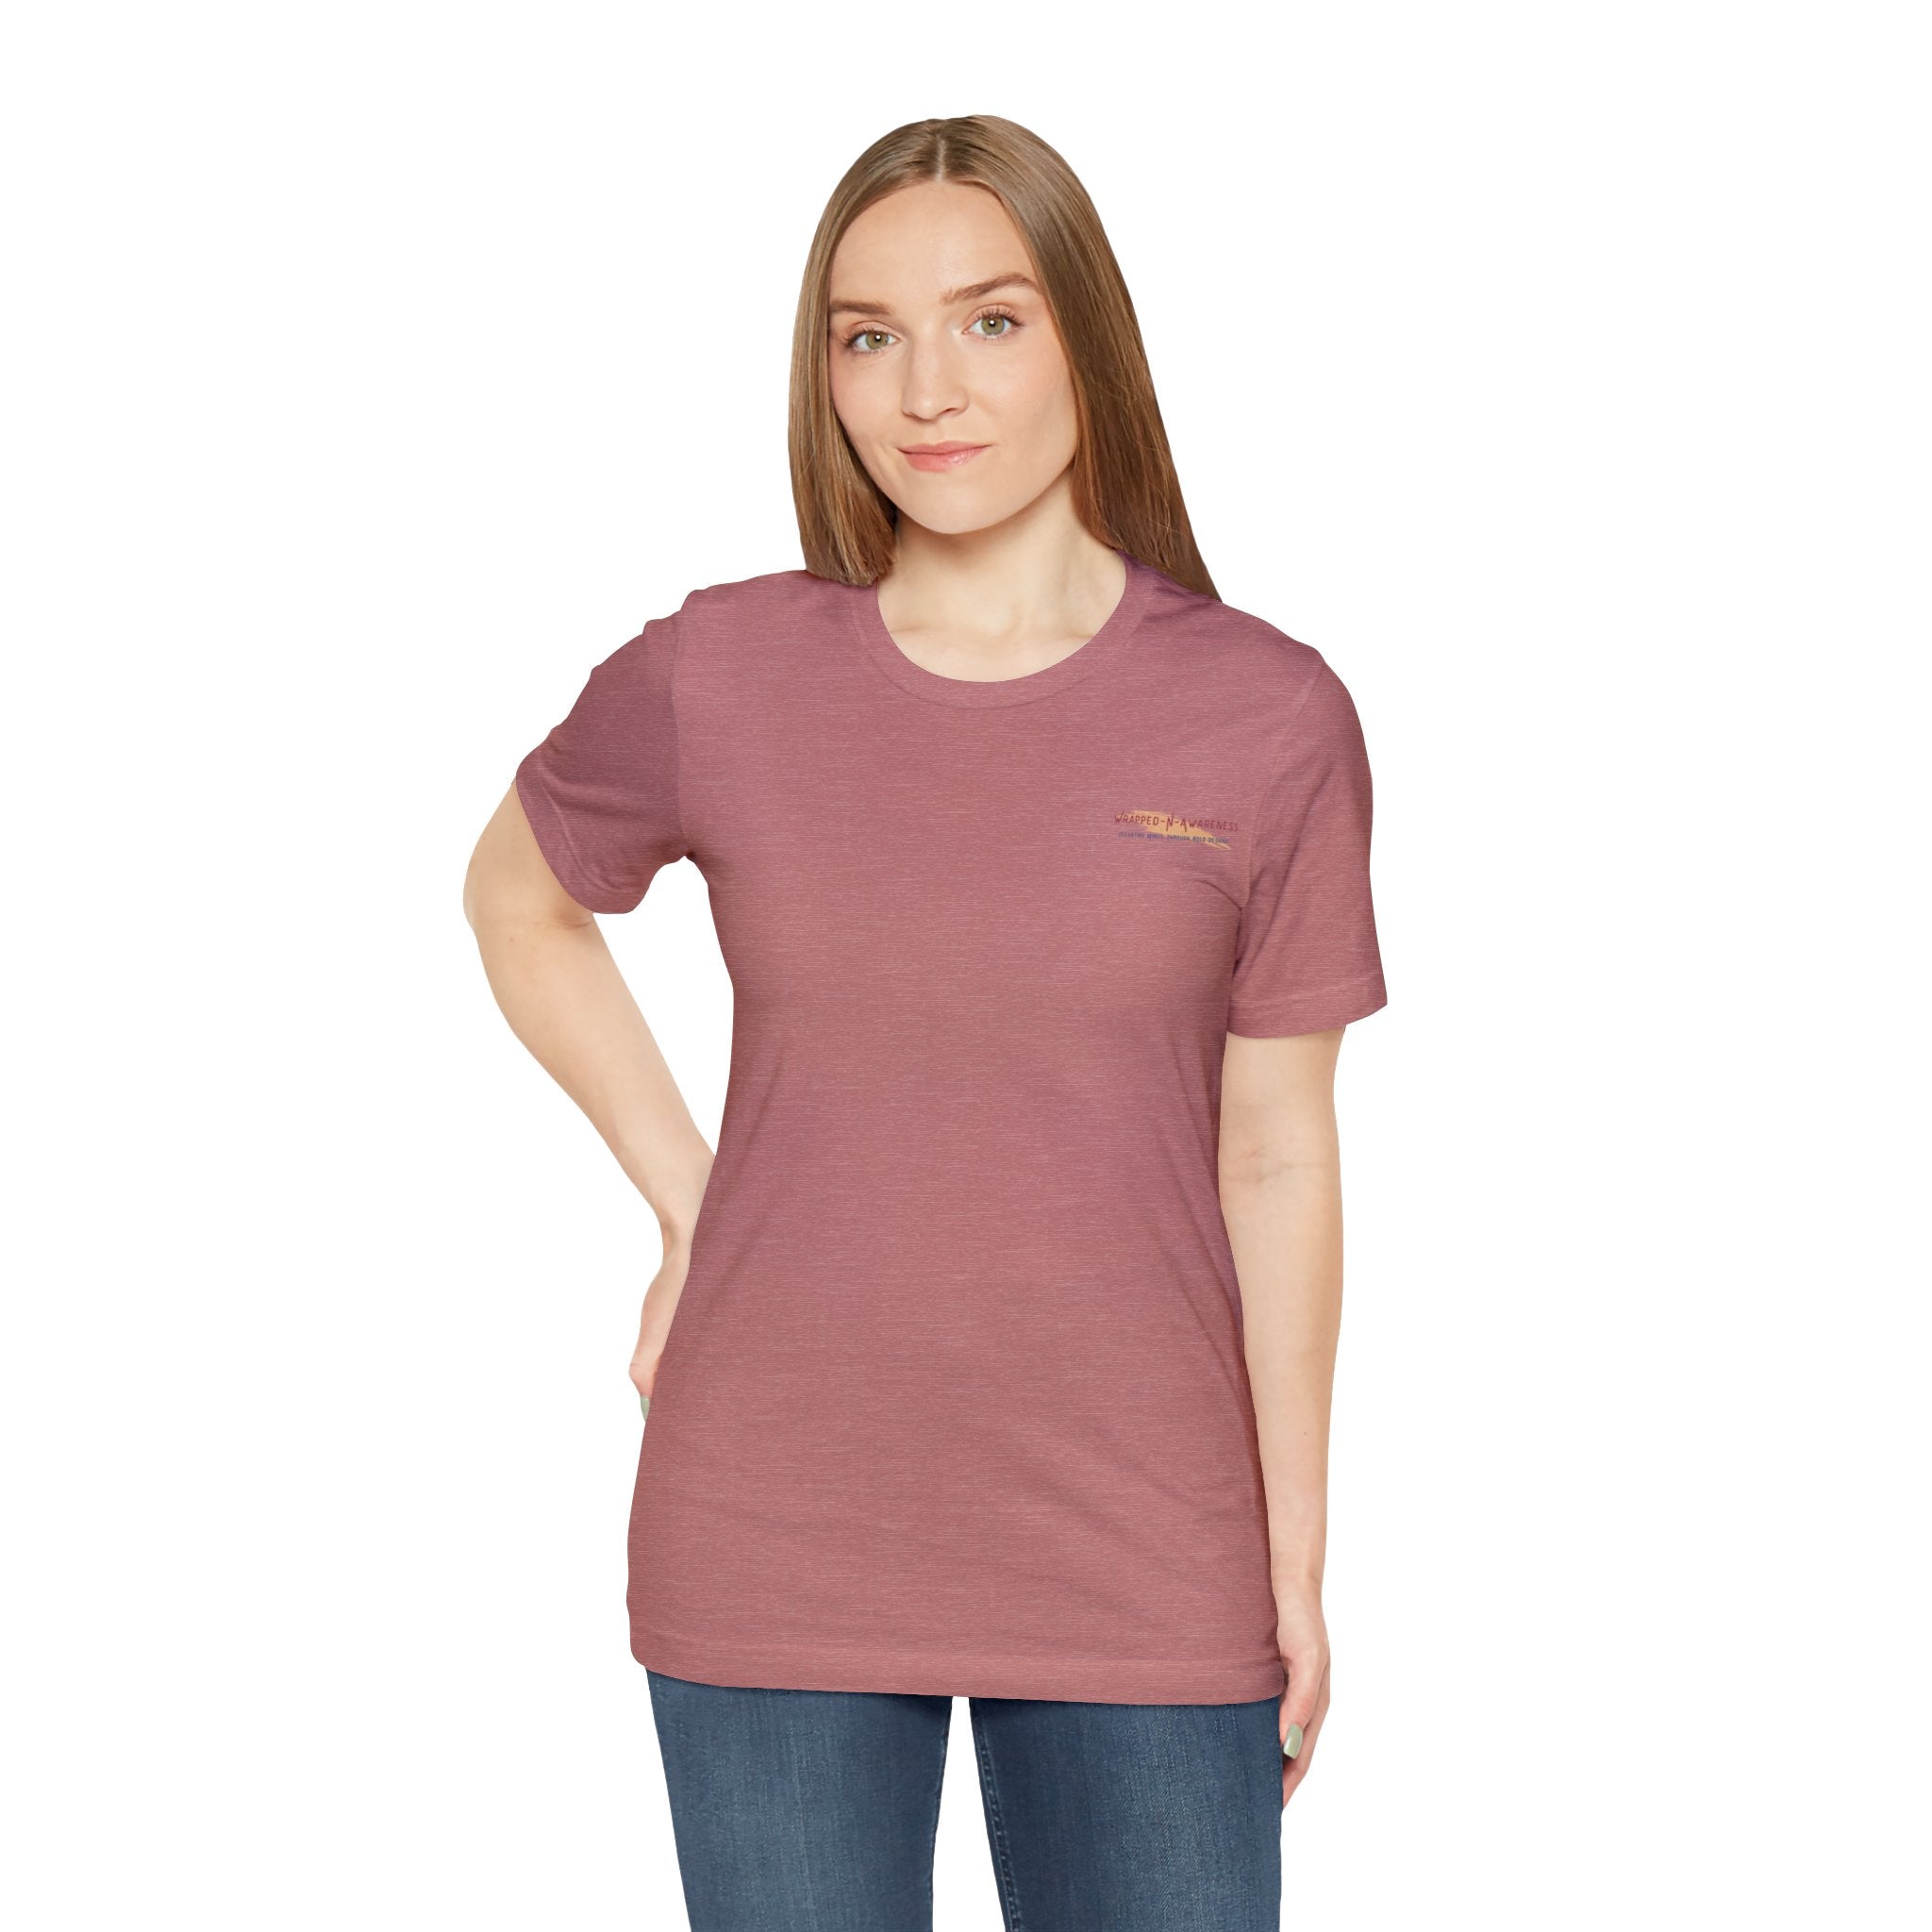 You Are Enough Short Sleeve Tee Bella+Canvas 3001 Heather Mauve Airlume Cotton Bella+Canvas 3001 Crew Neckline Jersey Short Sleeve Lightweight Fabric Mental Health Support Retail Fit Tear-away Label Tee Unisex Tee T-Shirt 9825070722866902967_2048 Printify